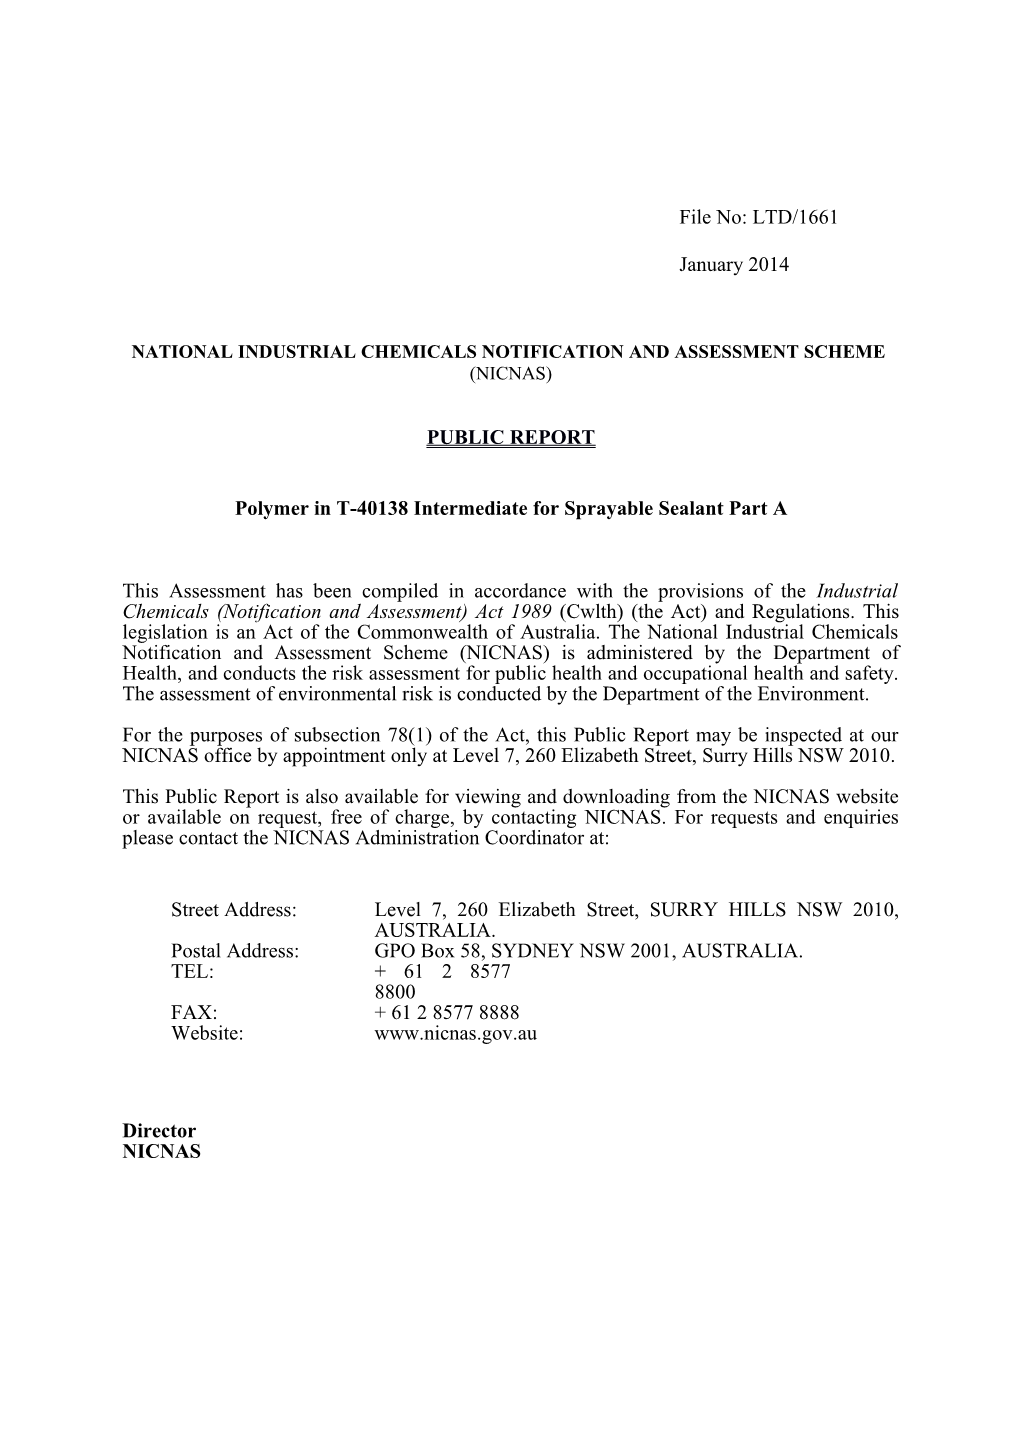 National Industrial Chemicals Notification and Assessment Scheme s6